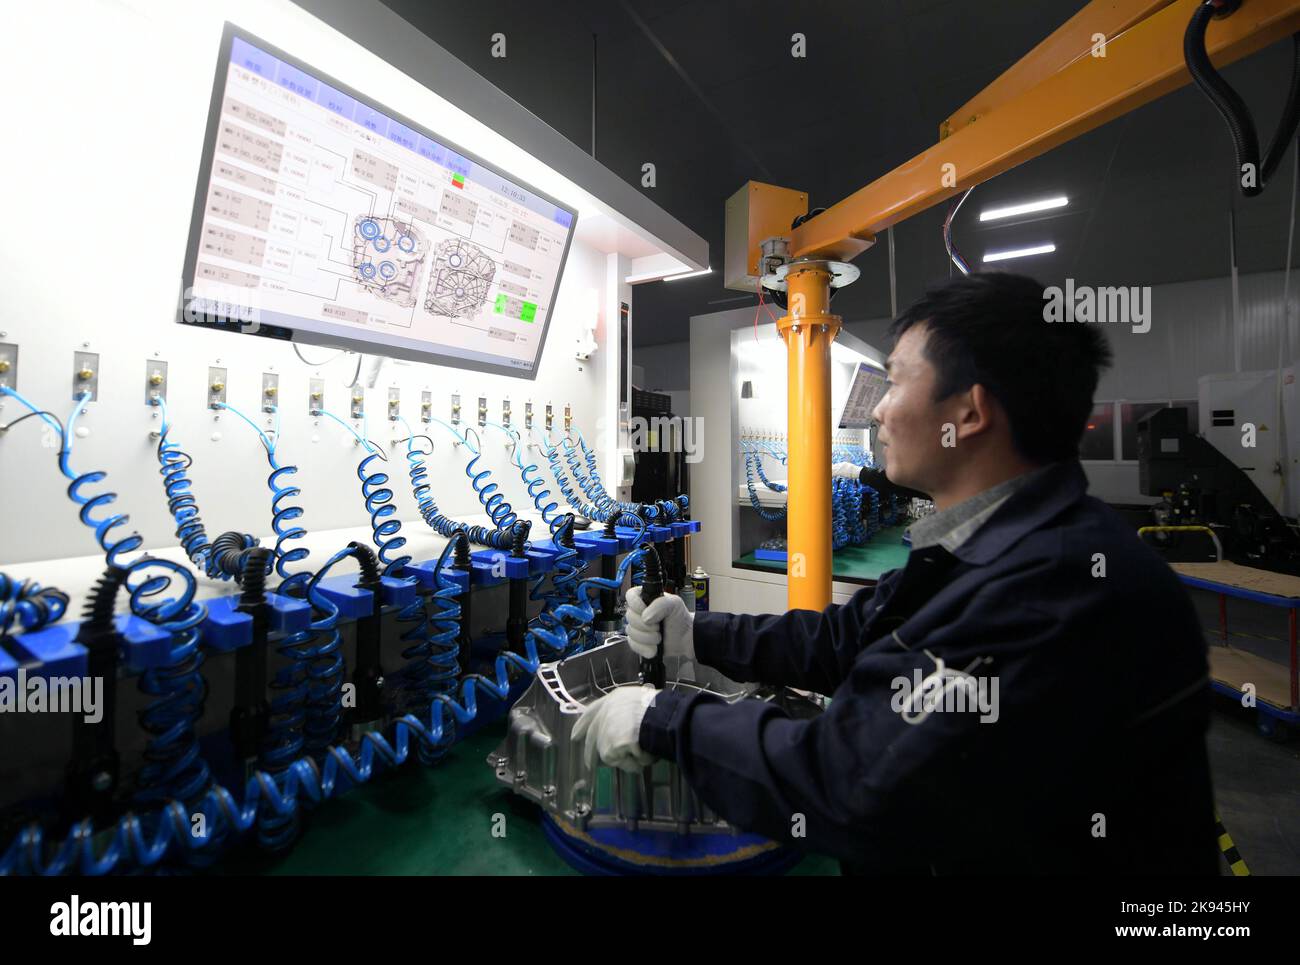 NANTONG, CHINA - OCTOBER 26, 2022 - Workers produce lightweight aluminum and magnesium alloy precision parts for vehicles at a smart workshop in Nanto Stock Photo